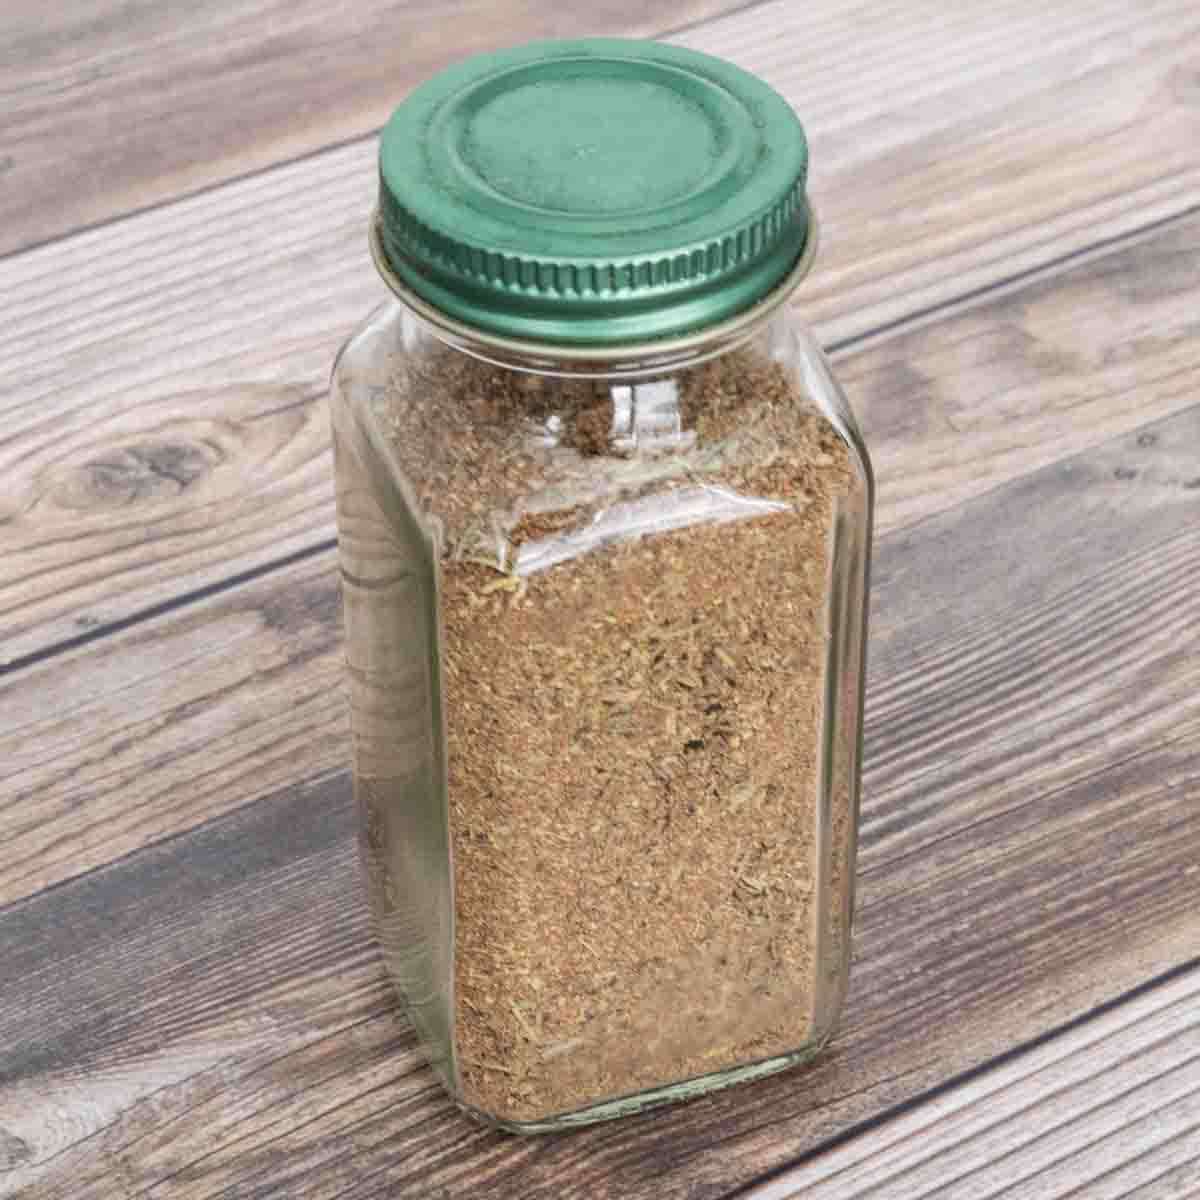 Poultry seasoning in a glass jar with a green lid.